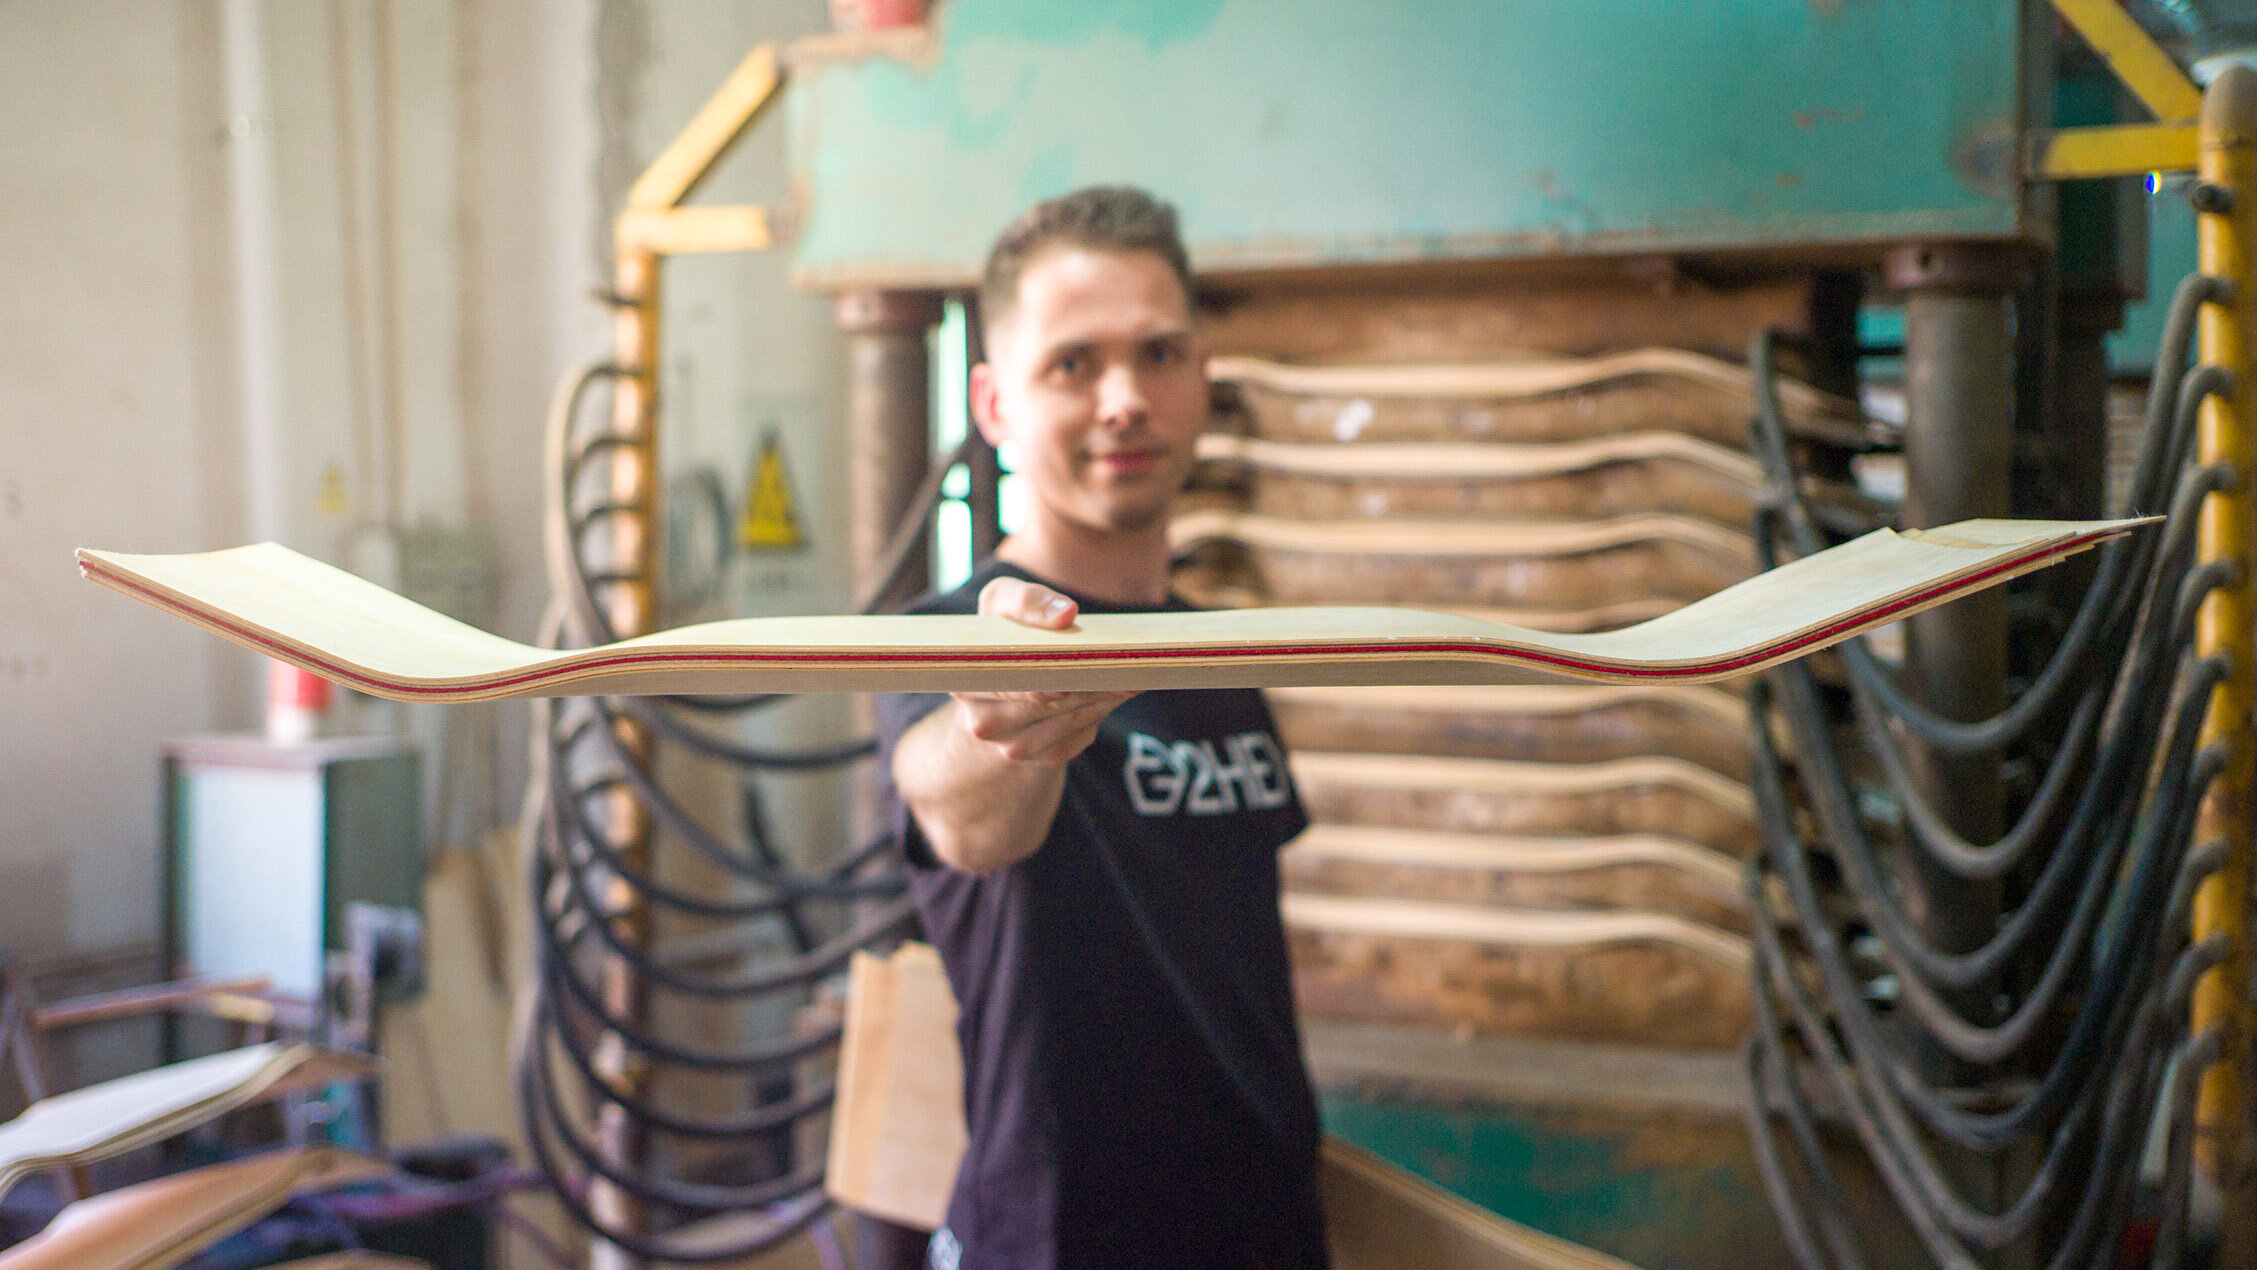 The Cloud based Skateboard Factory